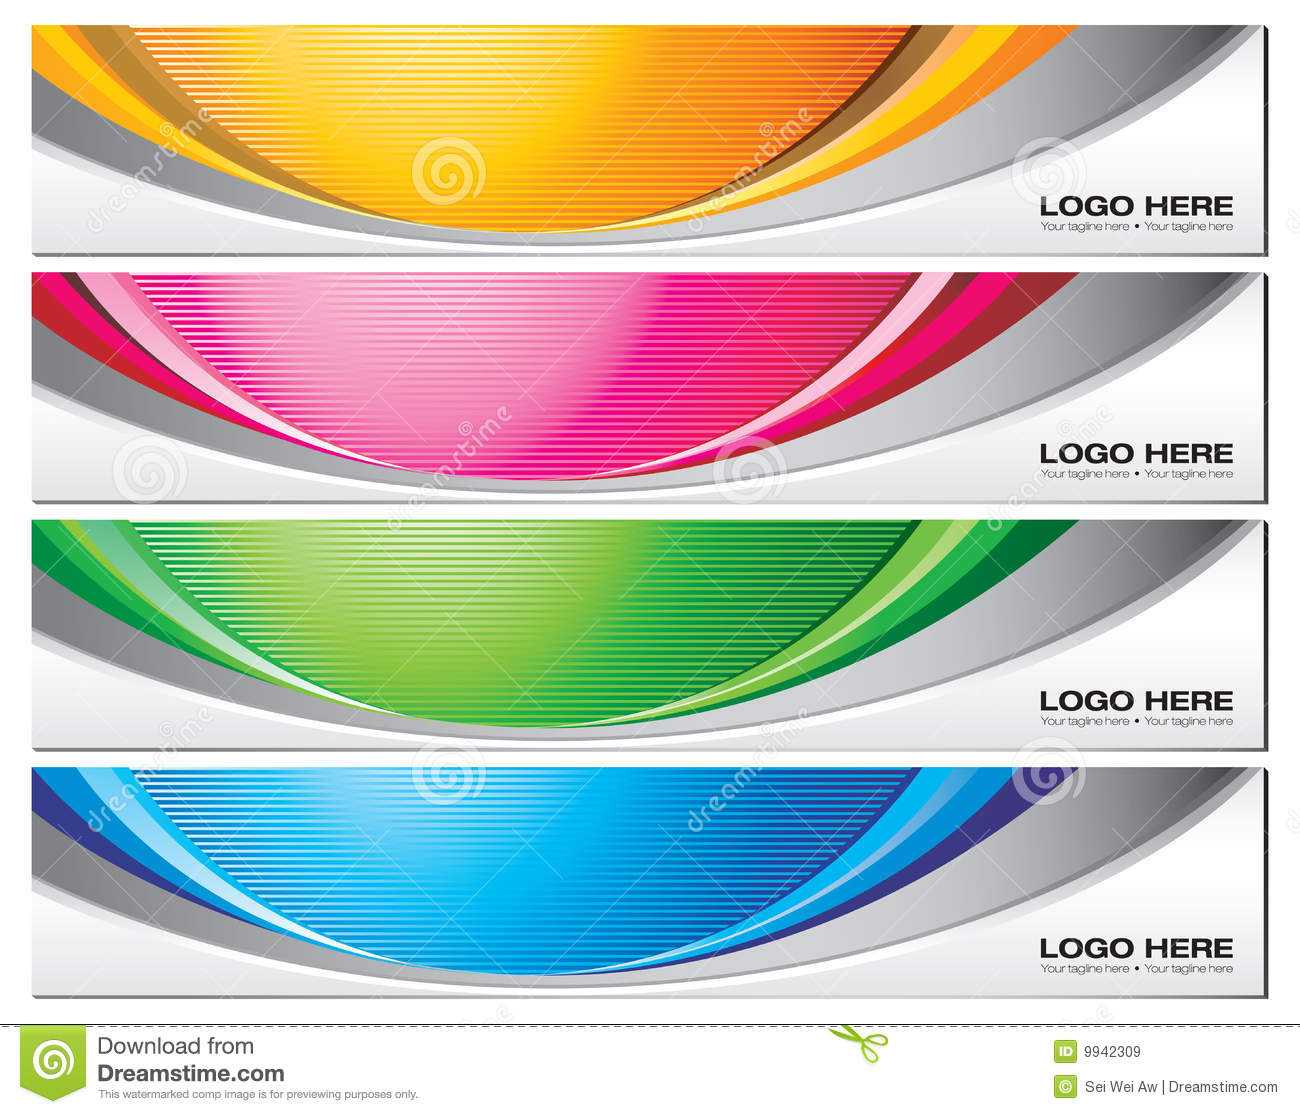 Banner Templates Stock Vector. Illustration Of Vector - 9942309 Throughout Website Banner Templates Free Download